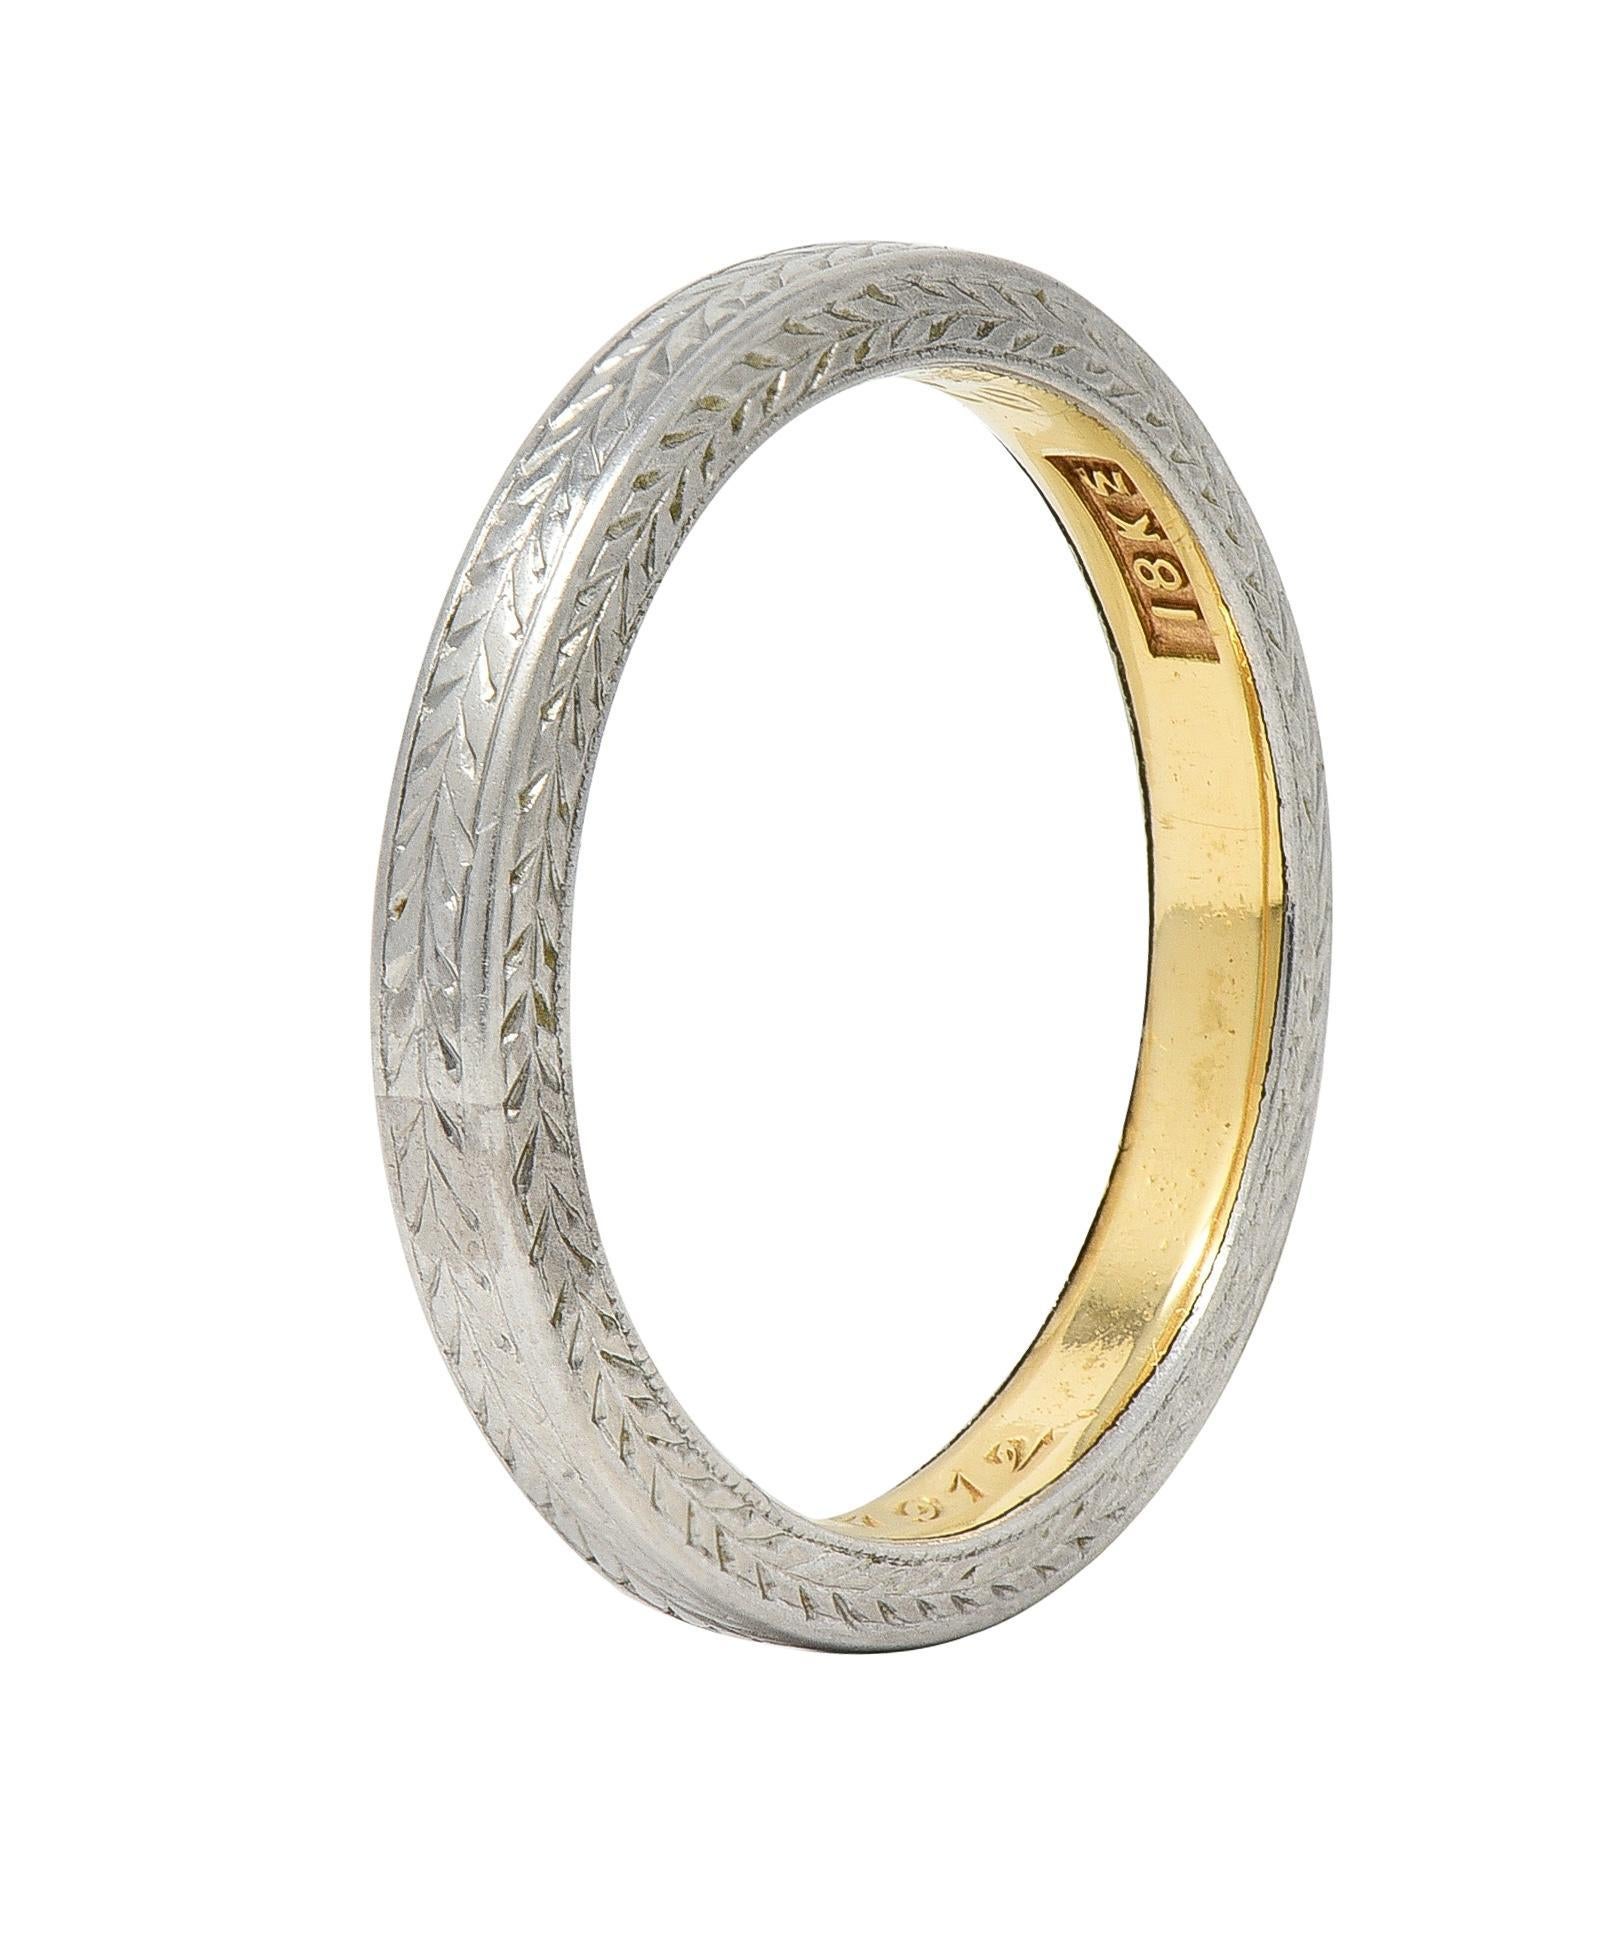 Designed as a white gold band with wheat engraving fully around
With engraved wheat motif profile 
With yellow gold inner shank 
Inscribed ' E.P.J from E.H.D June 4, 1912'
Stamped for 18 karat gold 
With maker's mark 
Circa: 1912; via dated